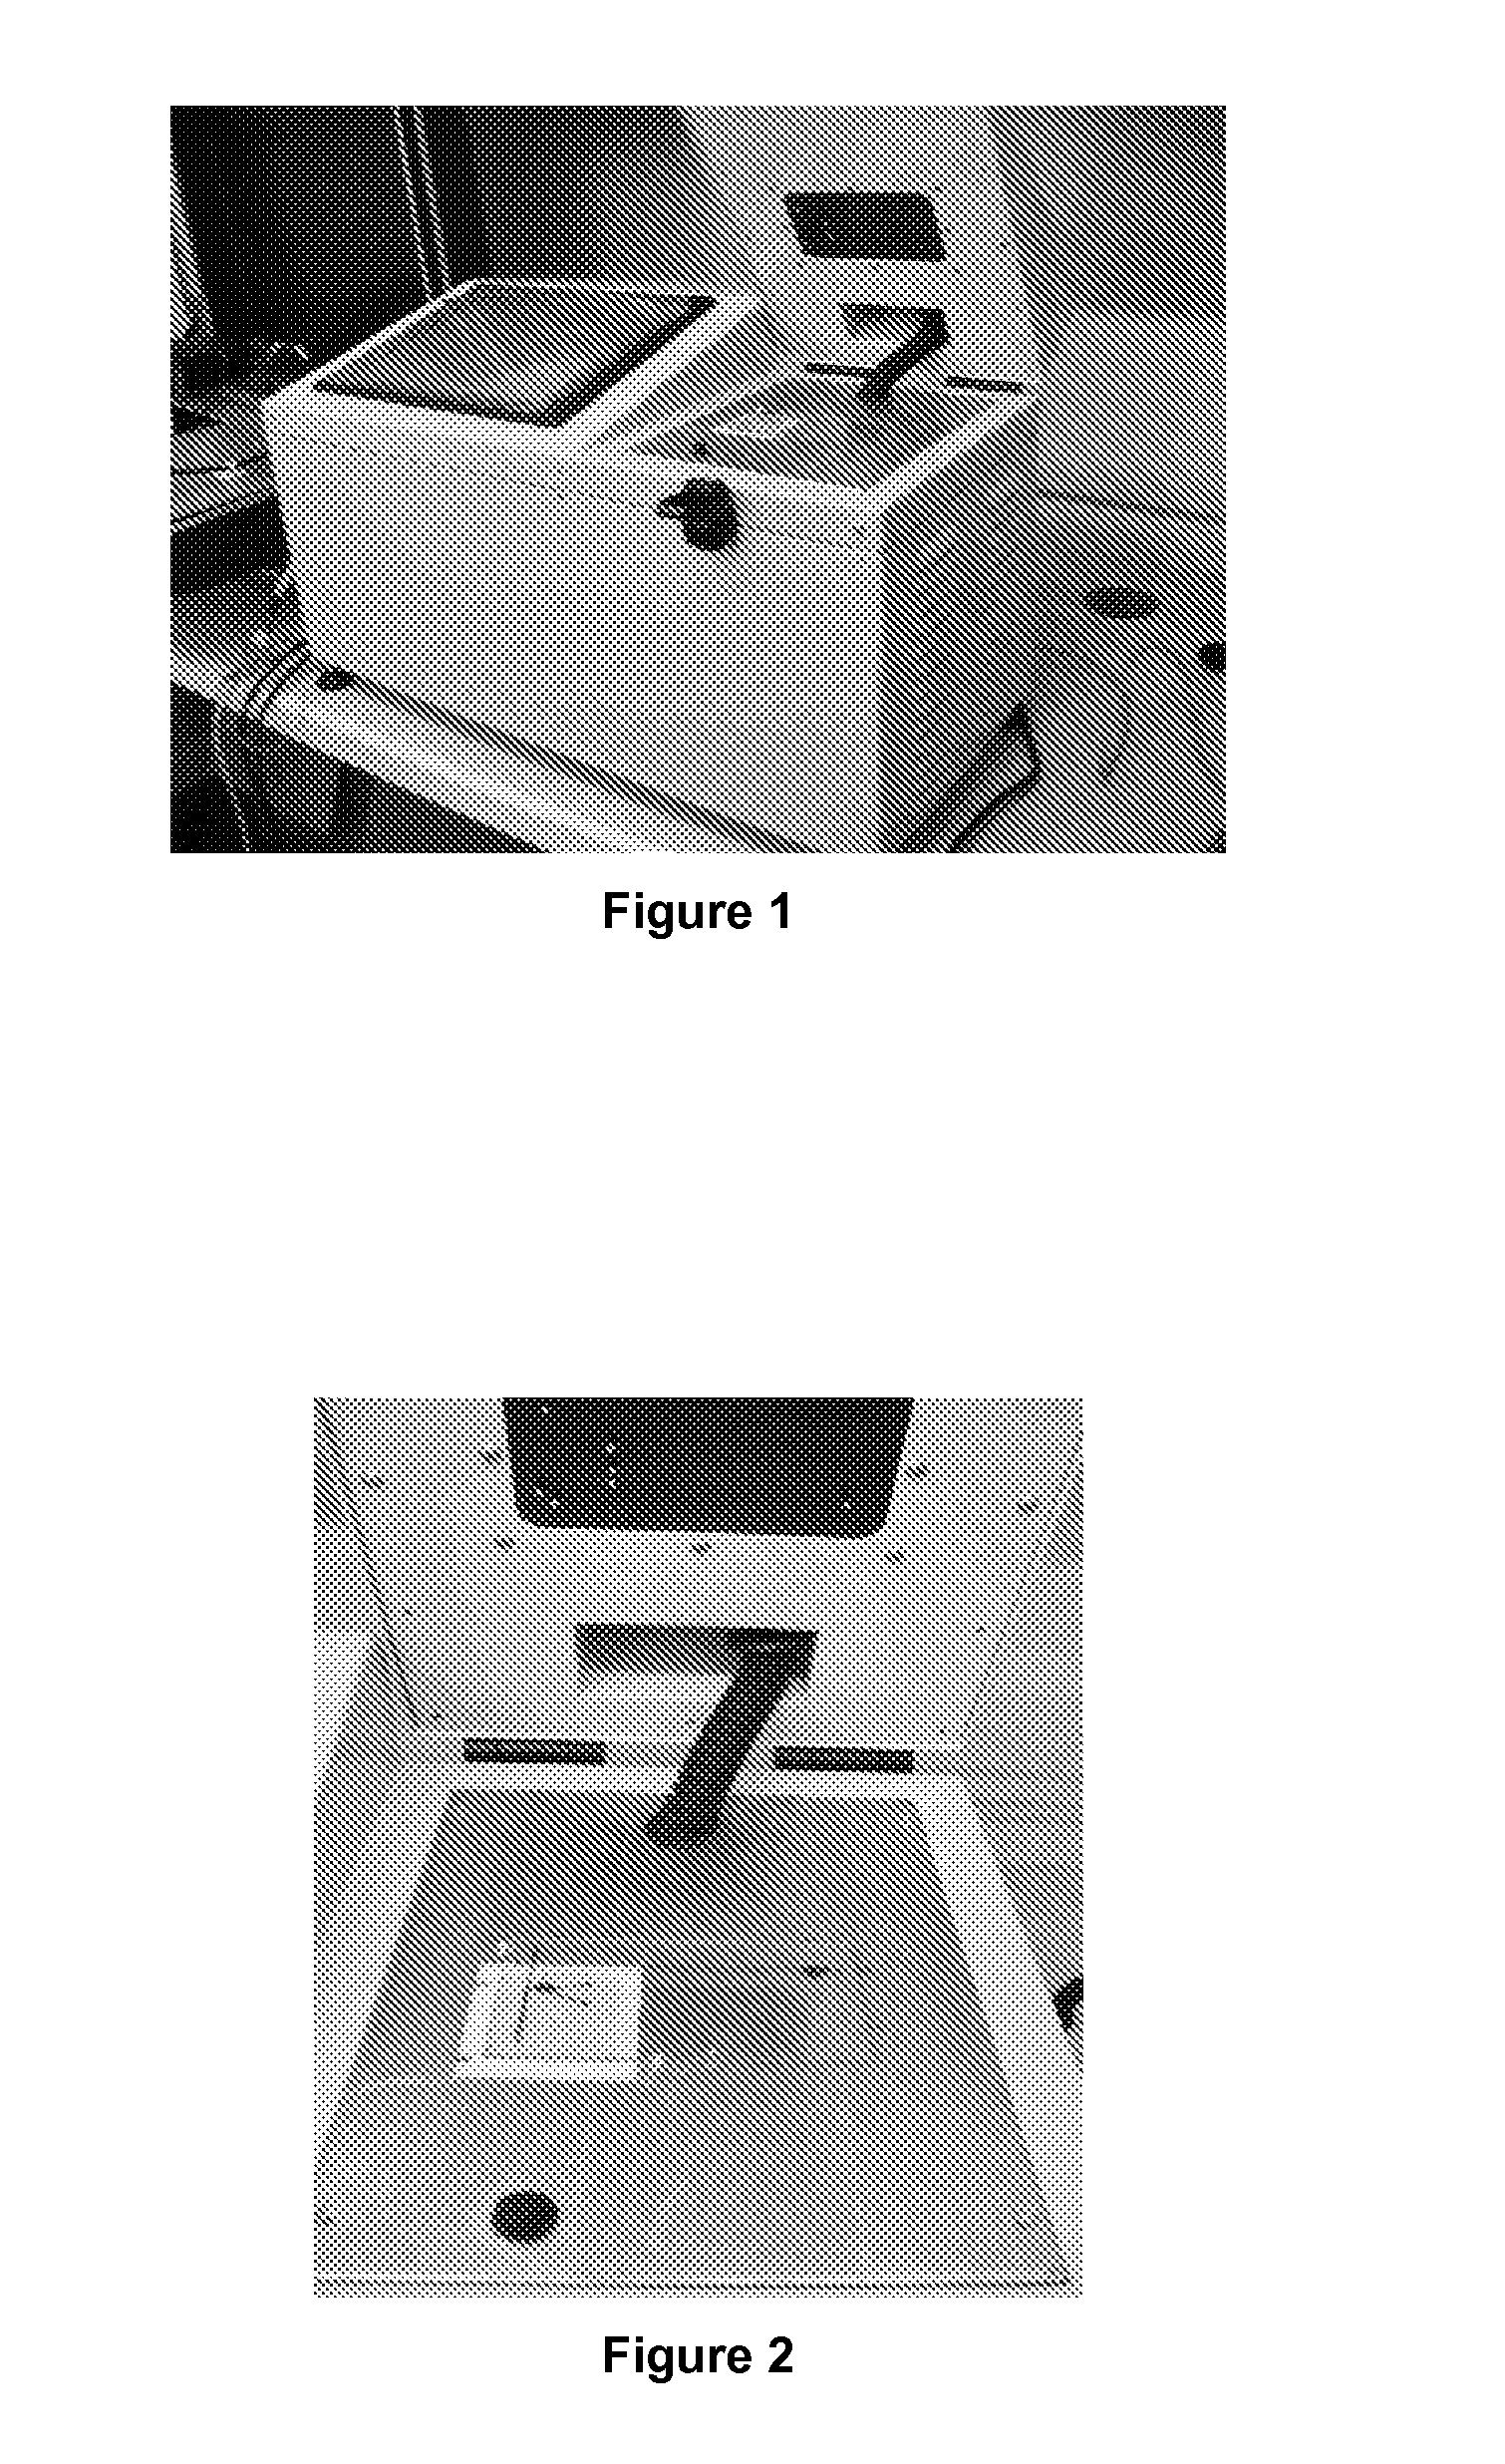 Microfluidic apparatus and method for DNA extraction, amplification and analysis